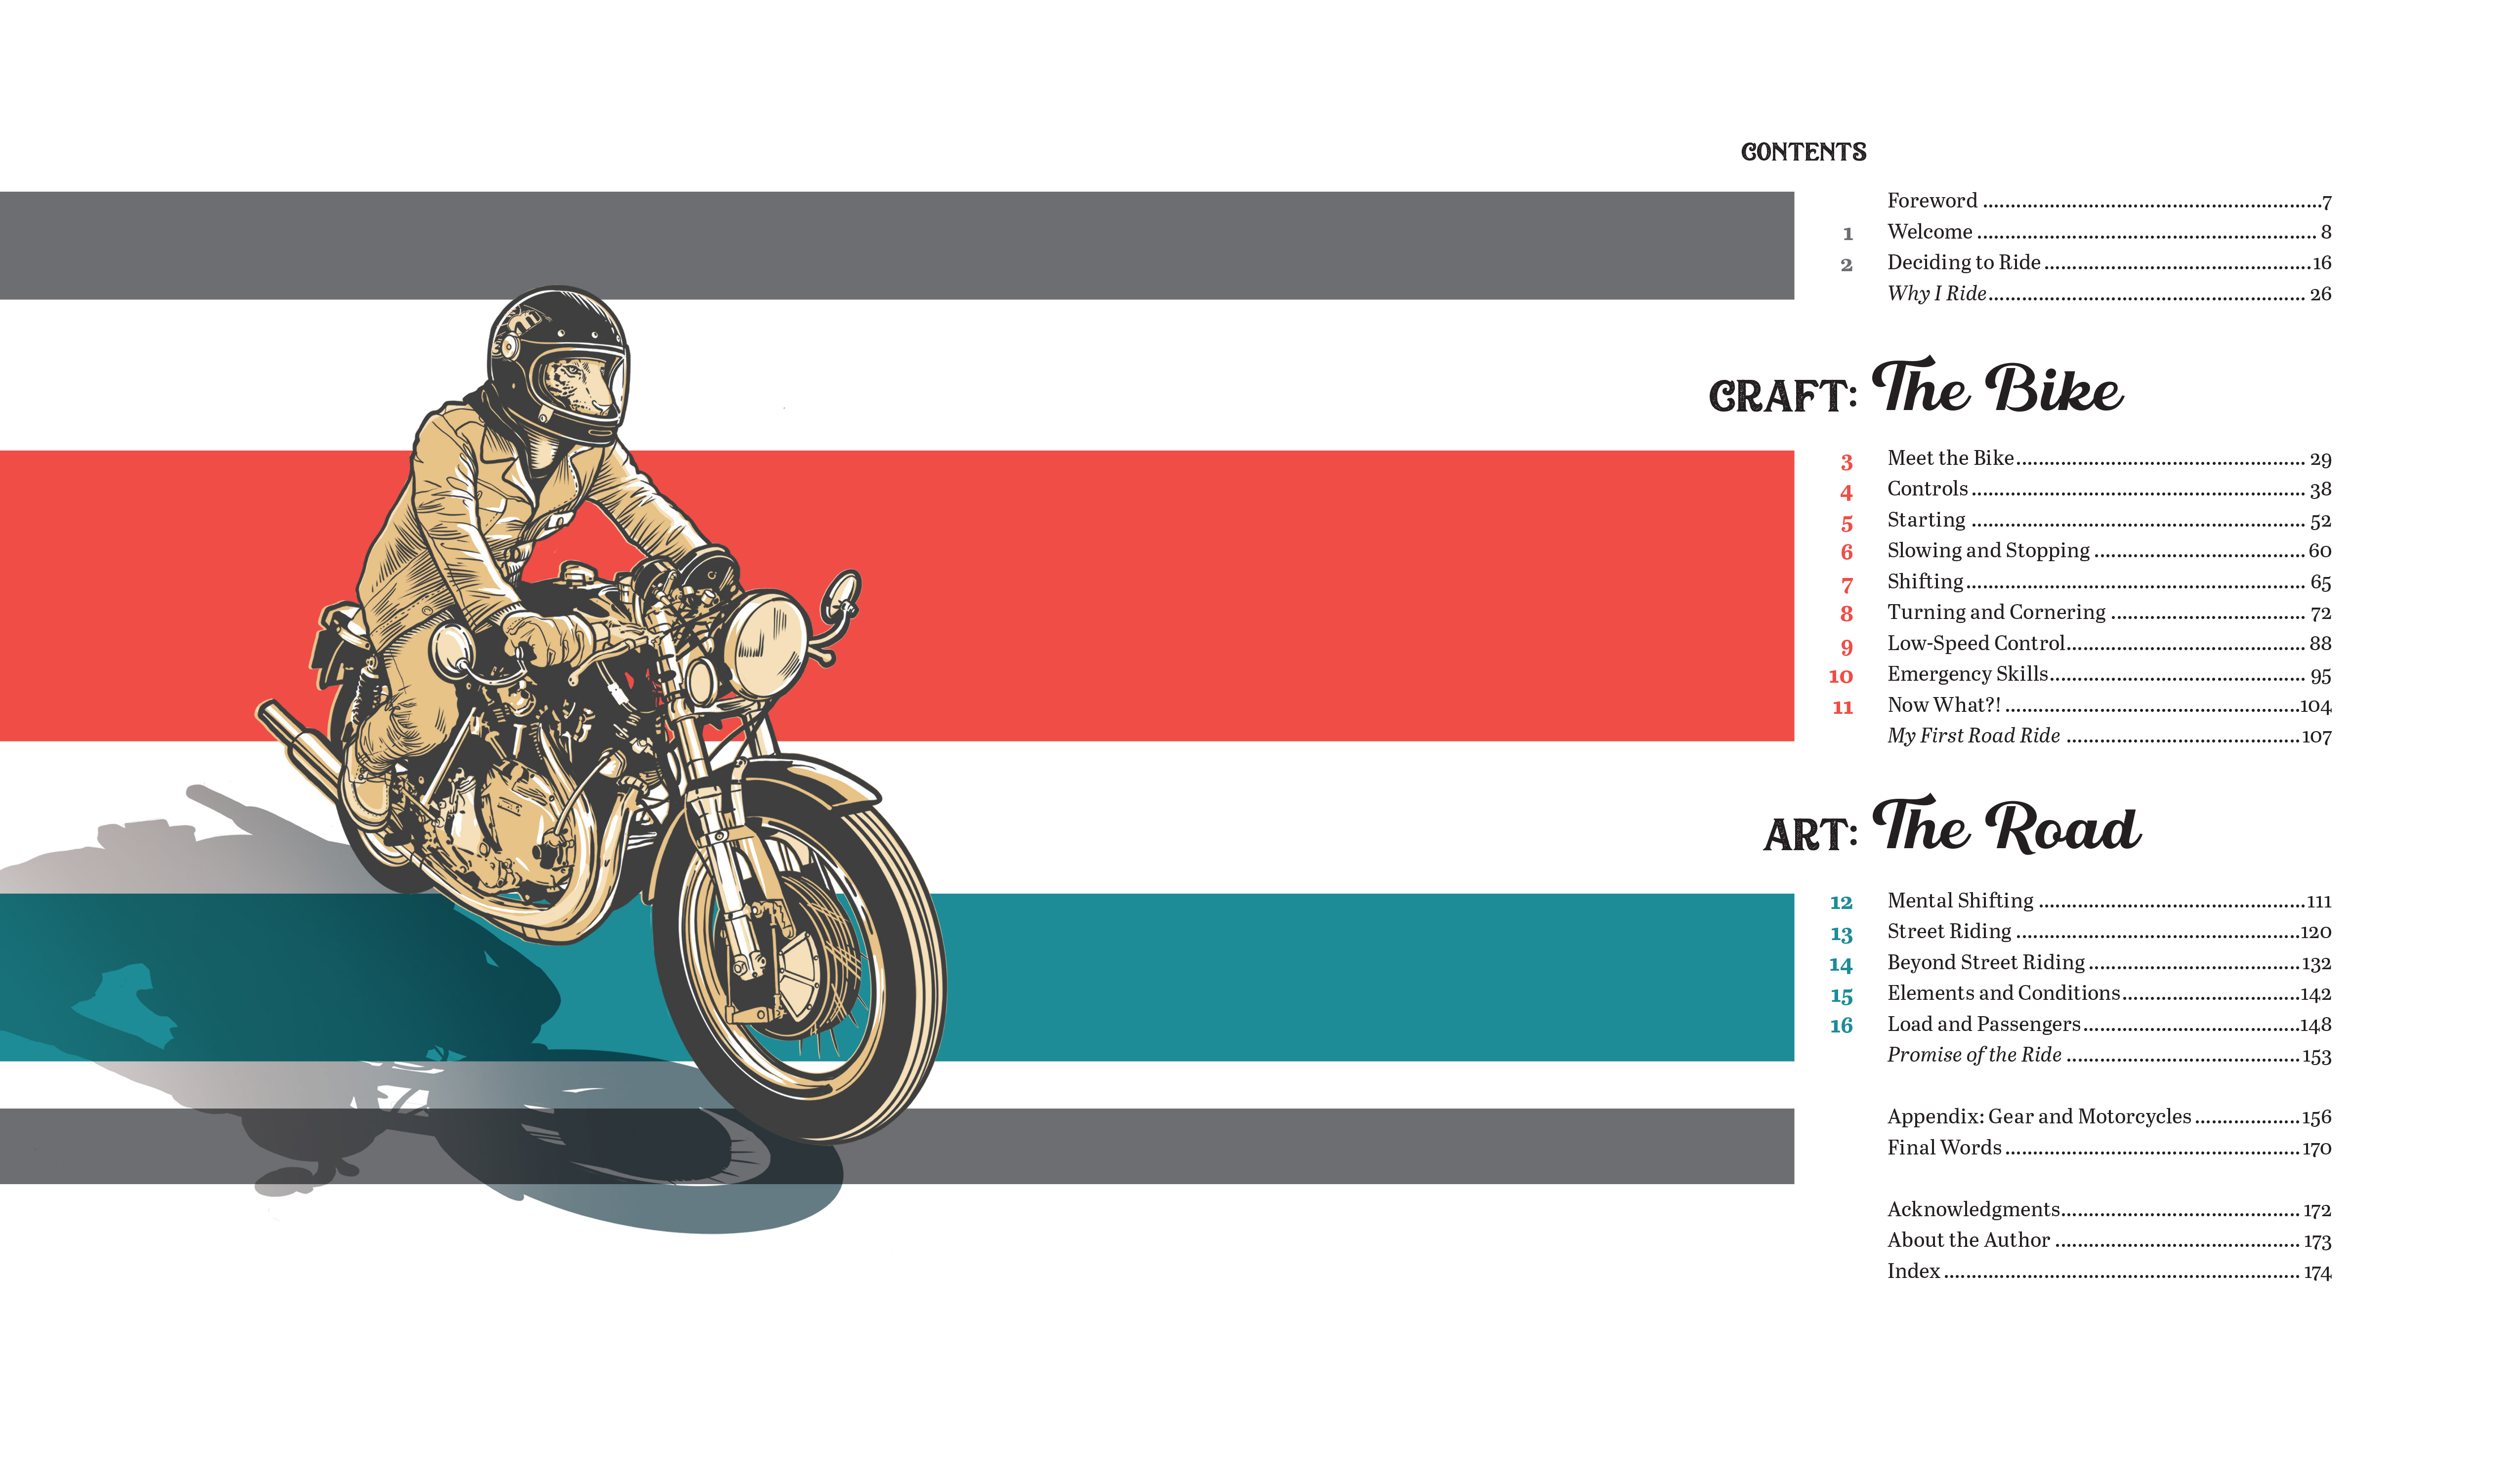 The Craft and Art of Motorcycling